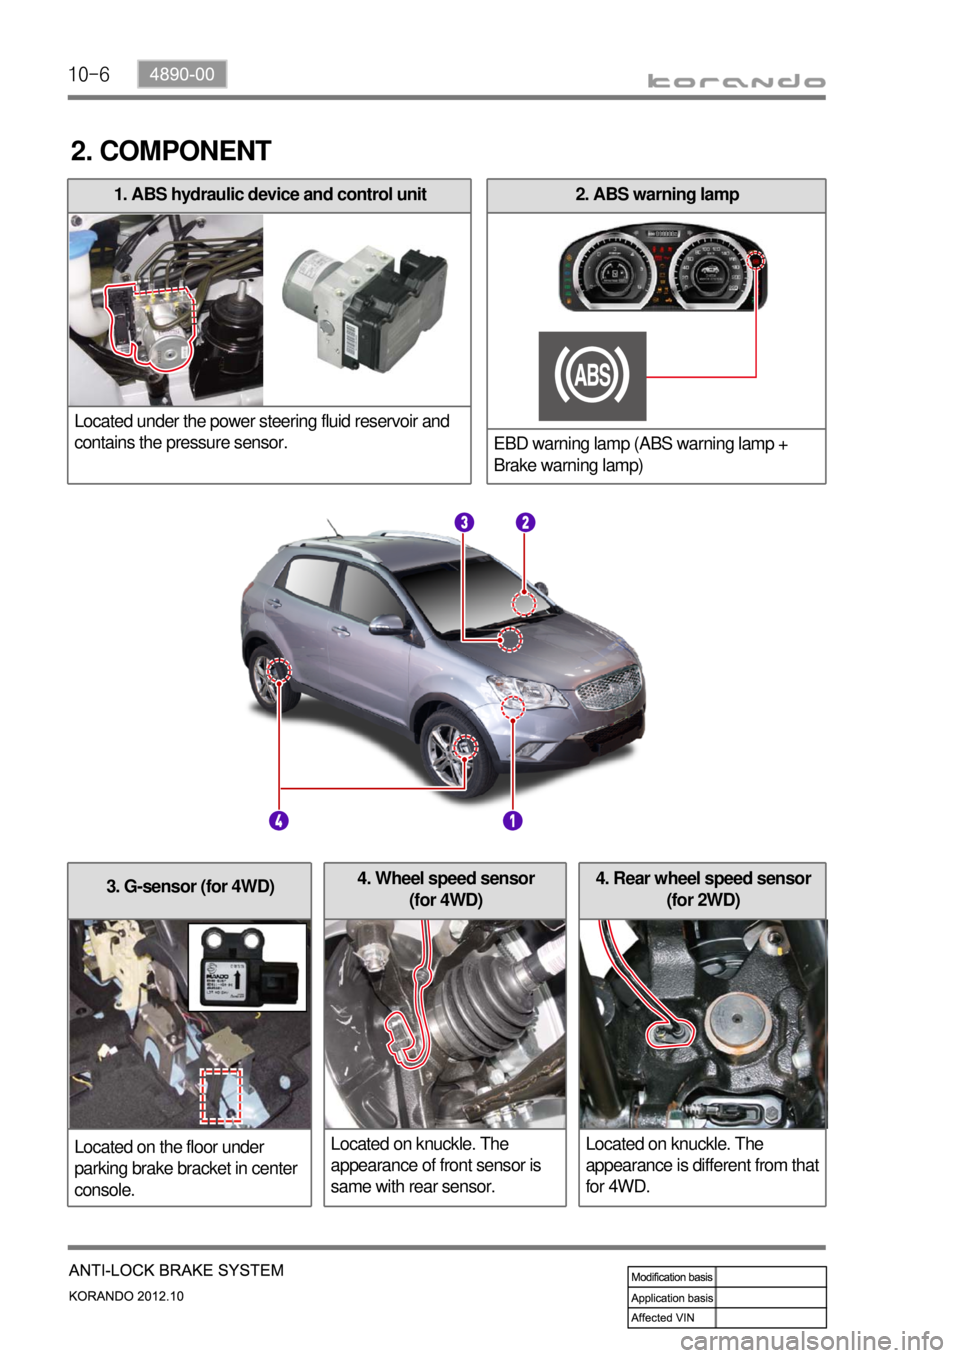 SSANGYONG KORANDO 2012 User Guide 10-6
3. G-sensor (for 4WD)
Located on the floor under 
parking brake bracket in center 
console.4. Rear wheel speed sensor 
(for 2WD)
Located on knuckle. The 
appearance is different from that 
for 4W